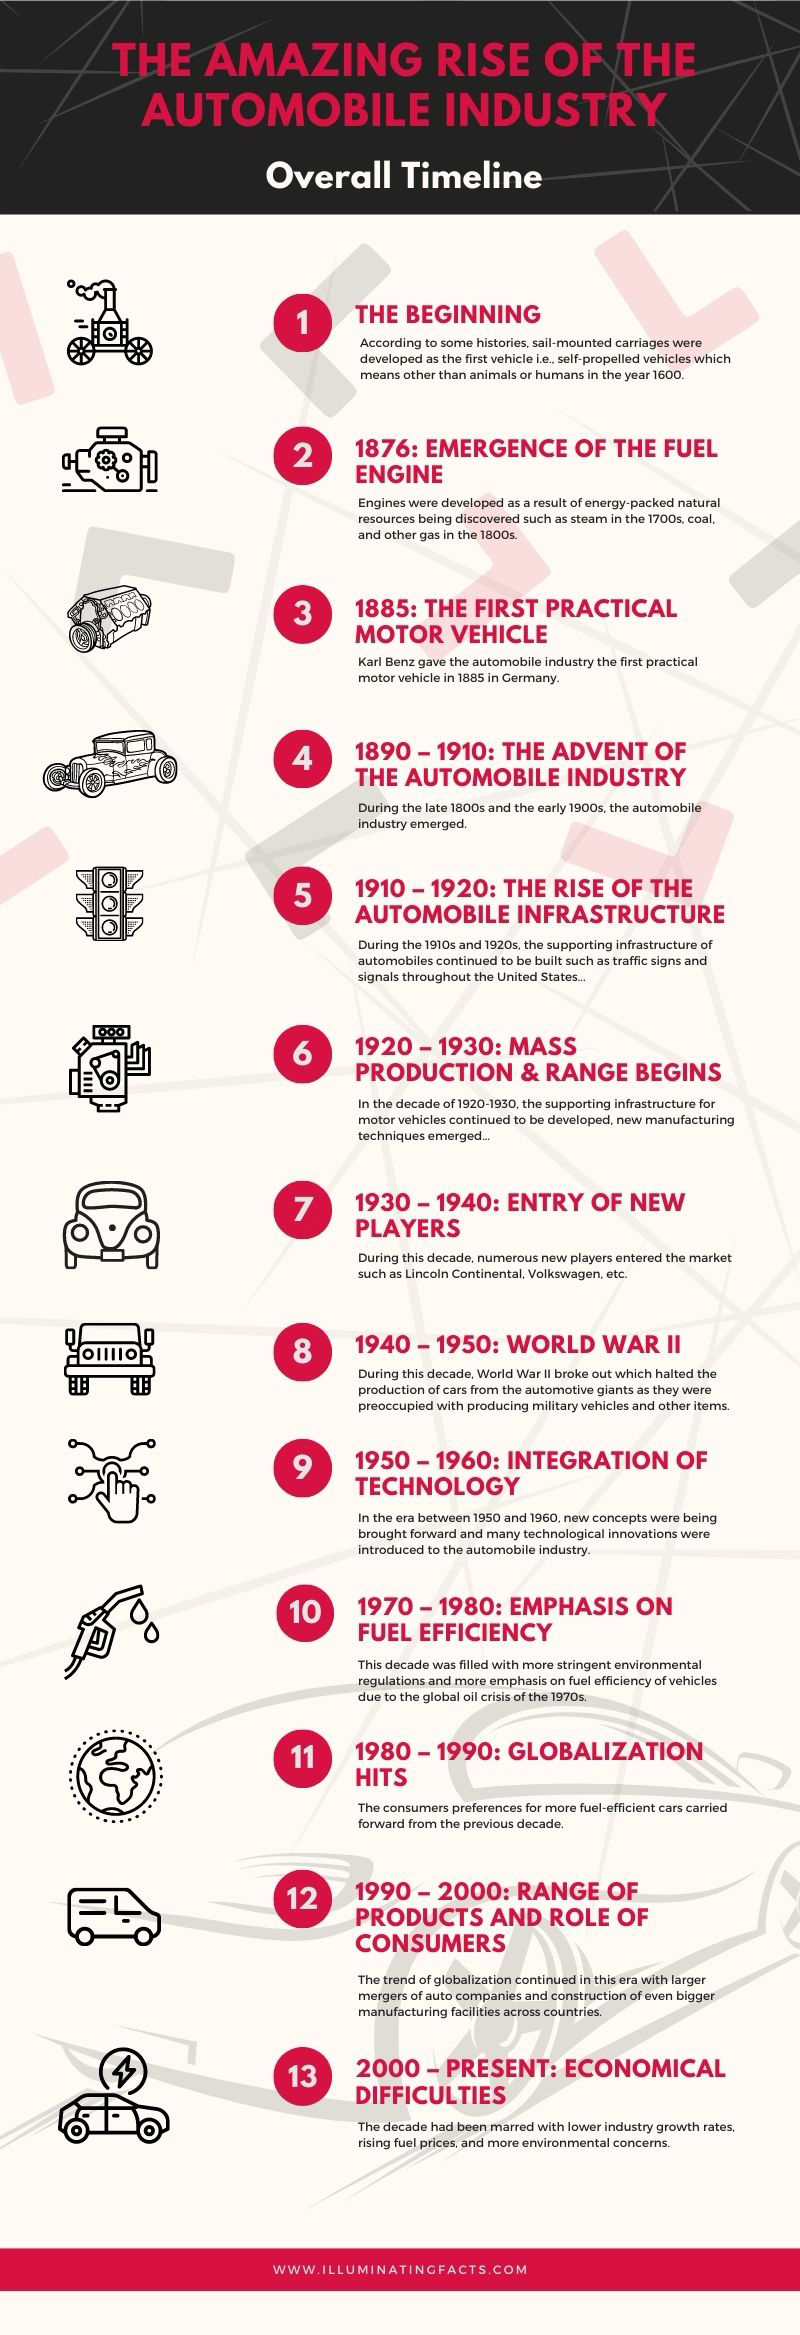 The Amazing Rise of the Automobile Industry - Overall Timeline